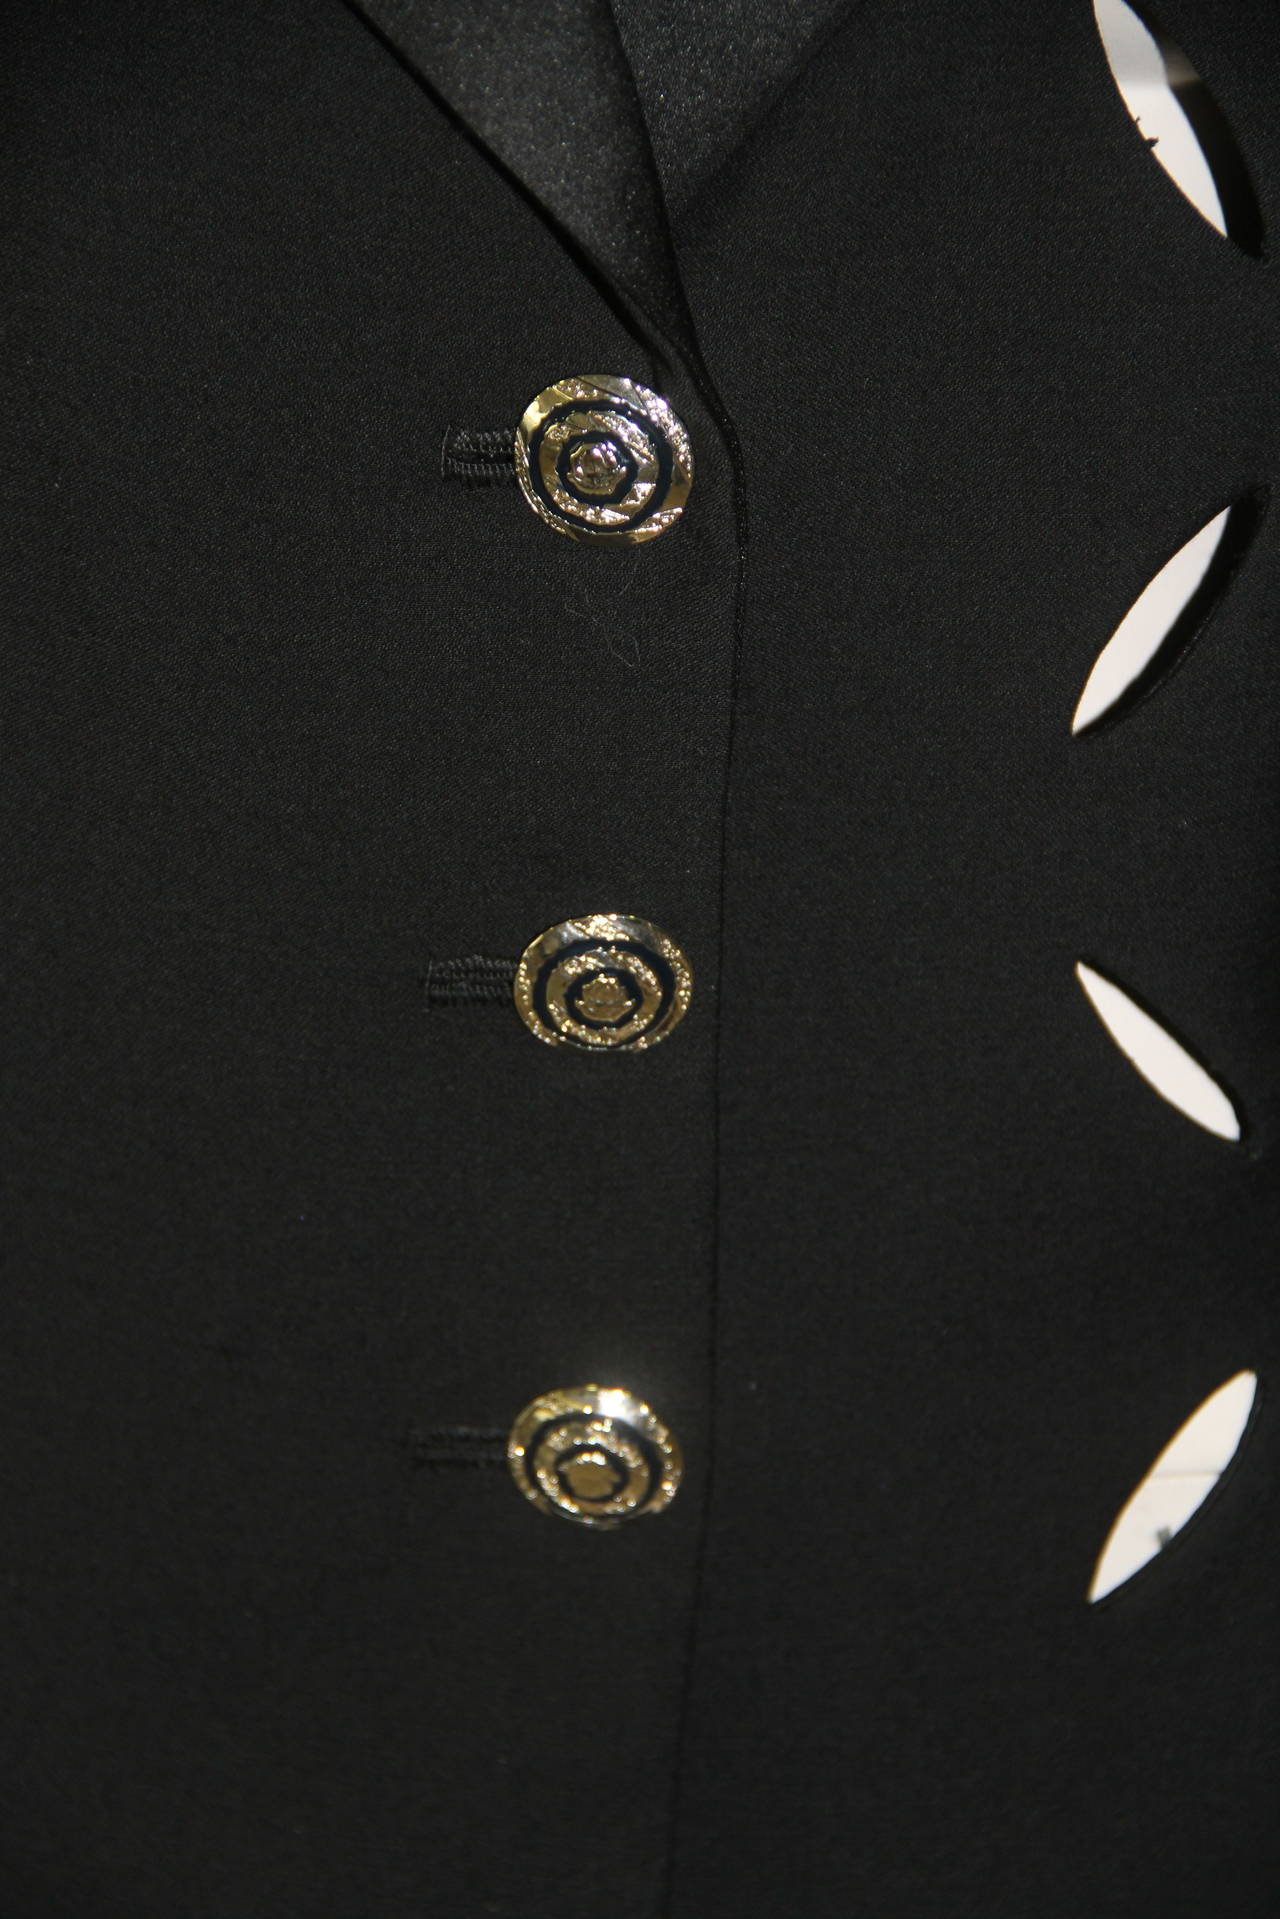 Gianni Versace black wool and silk cut-out three button tuxedo evening jacket from the Spring 1994 Punk collection.

Marked an Italian size 44.

Manufacturer - Alias S.p.a.

Fabric content - 100% wool with silk